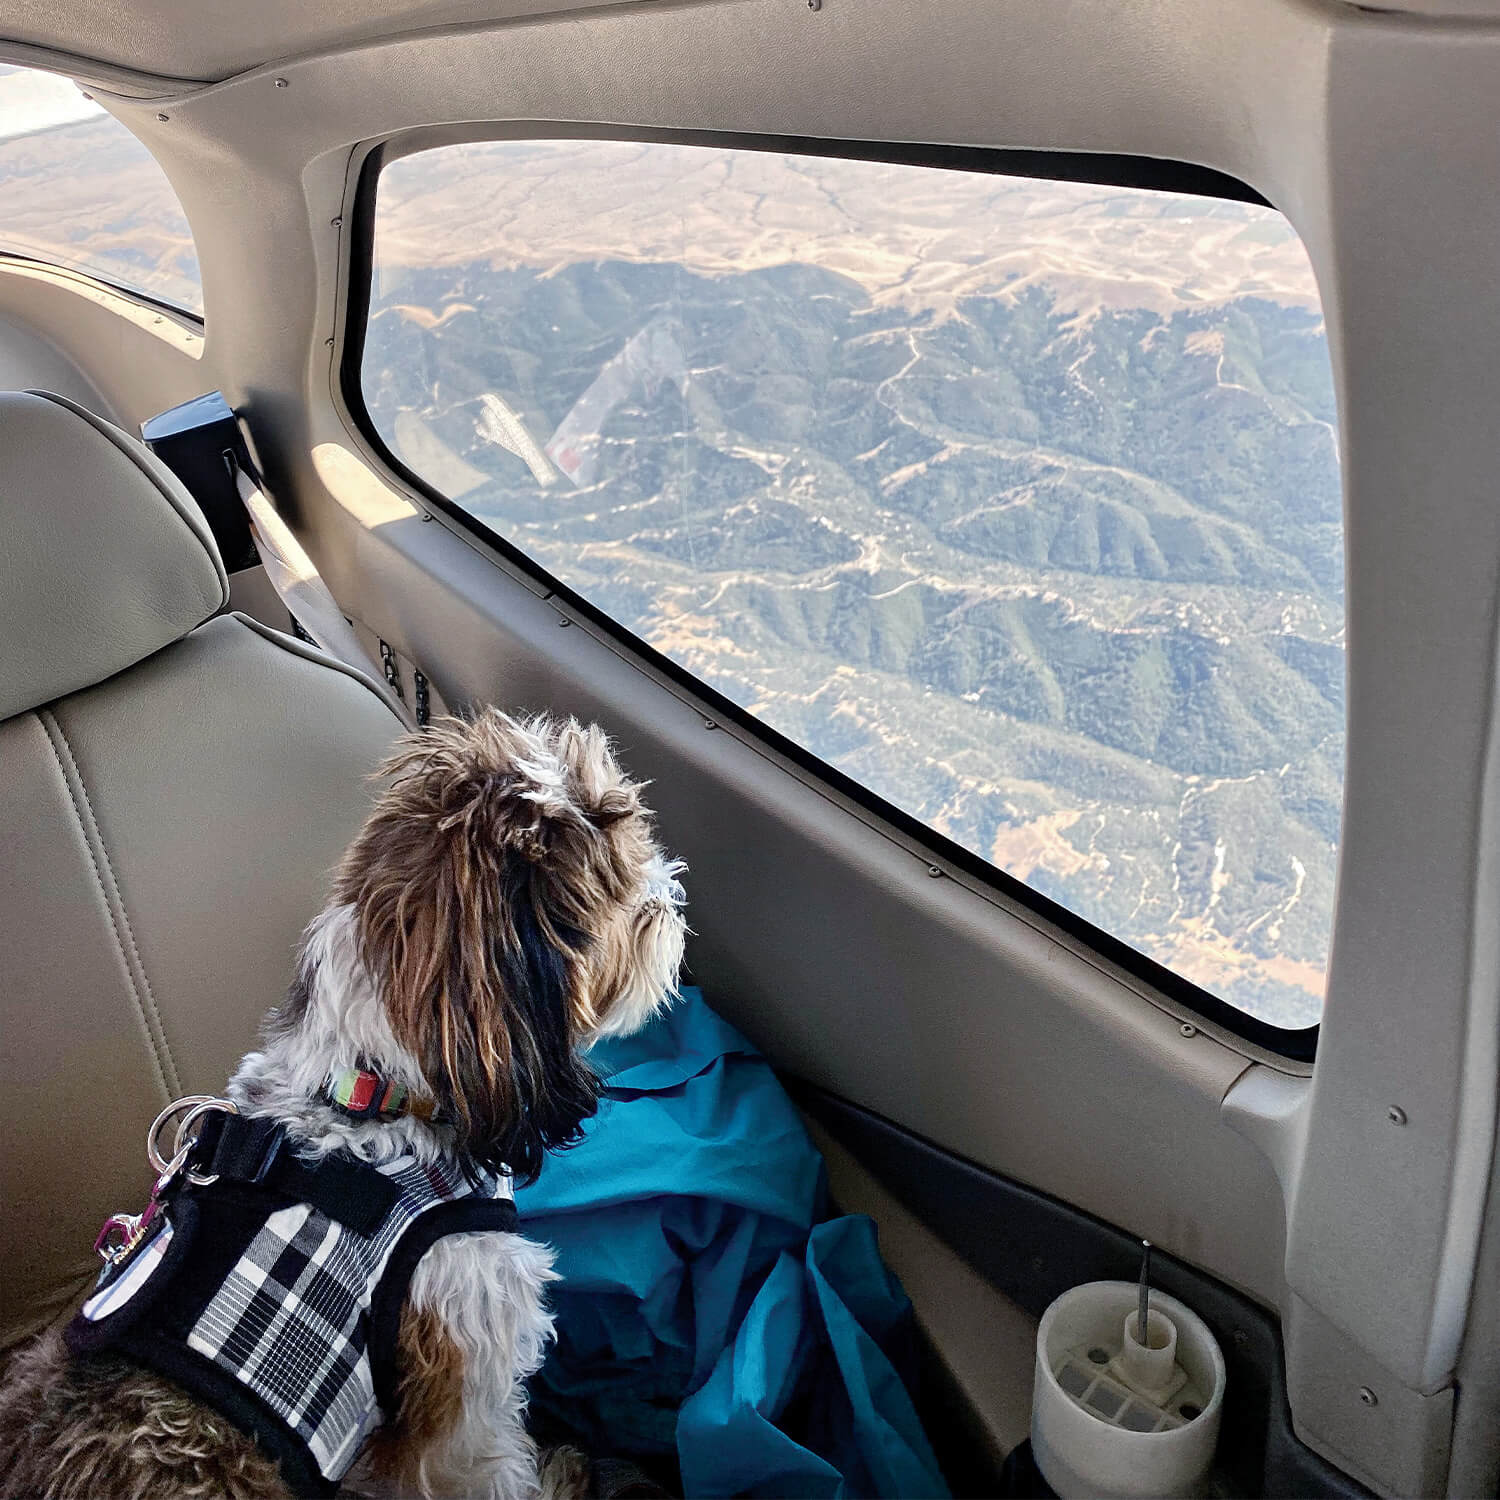 Dog looking out the window of a Cessna piston aircraft.